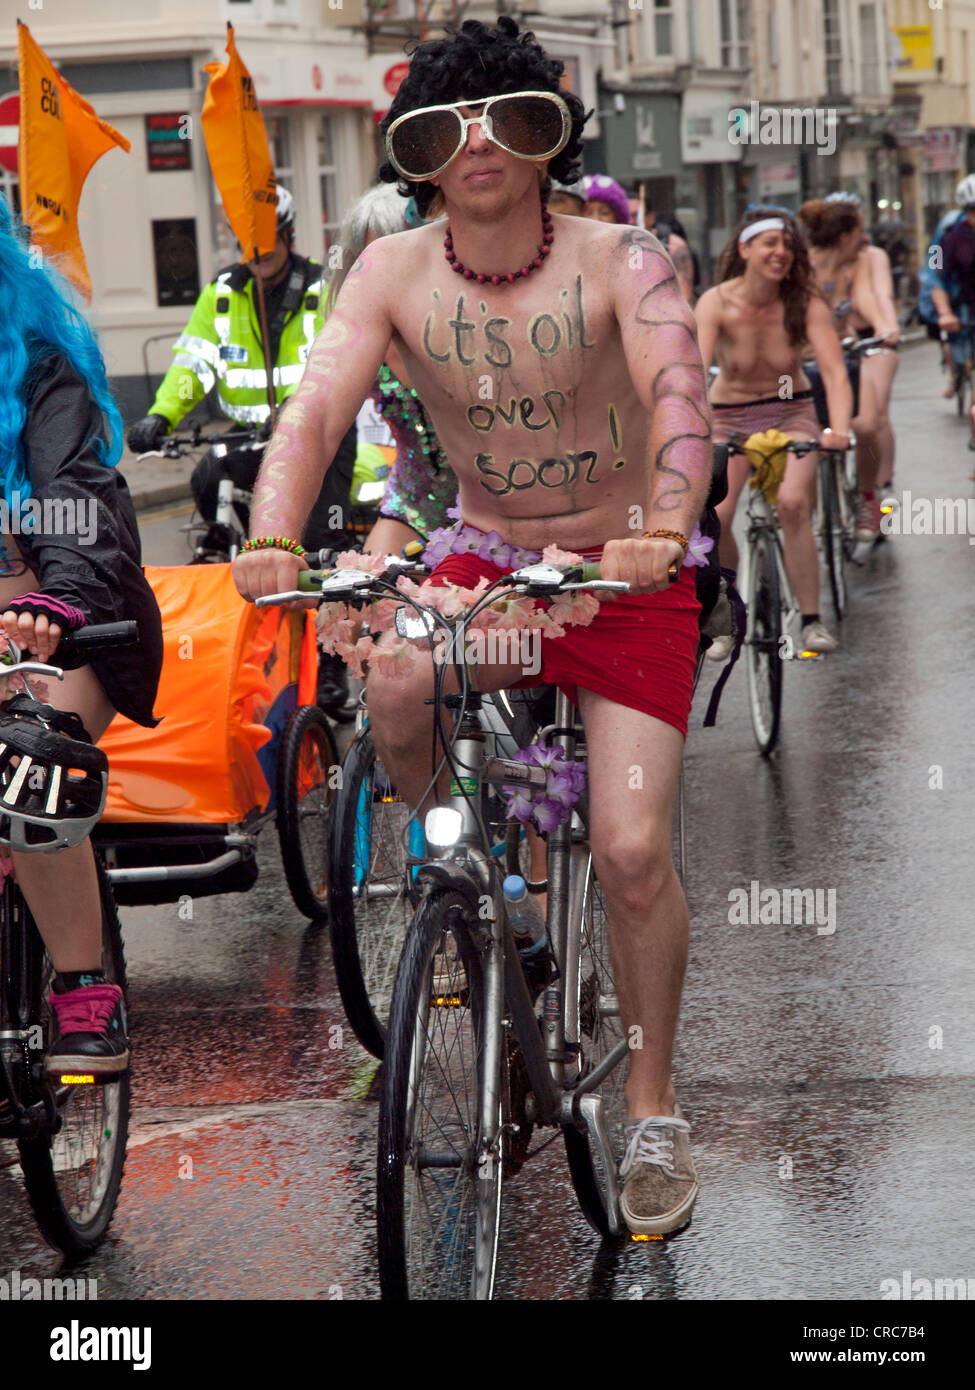 Brighton naked bike ride: the day in pictures